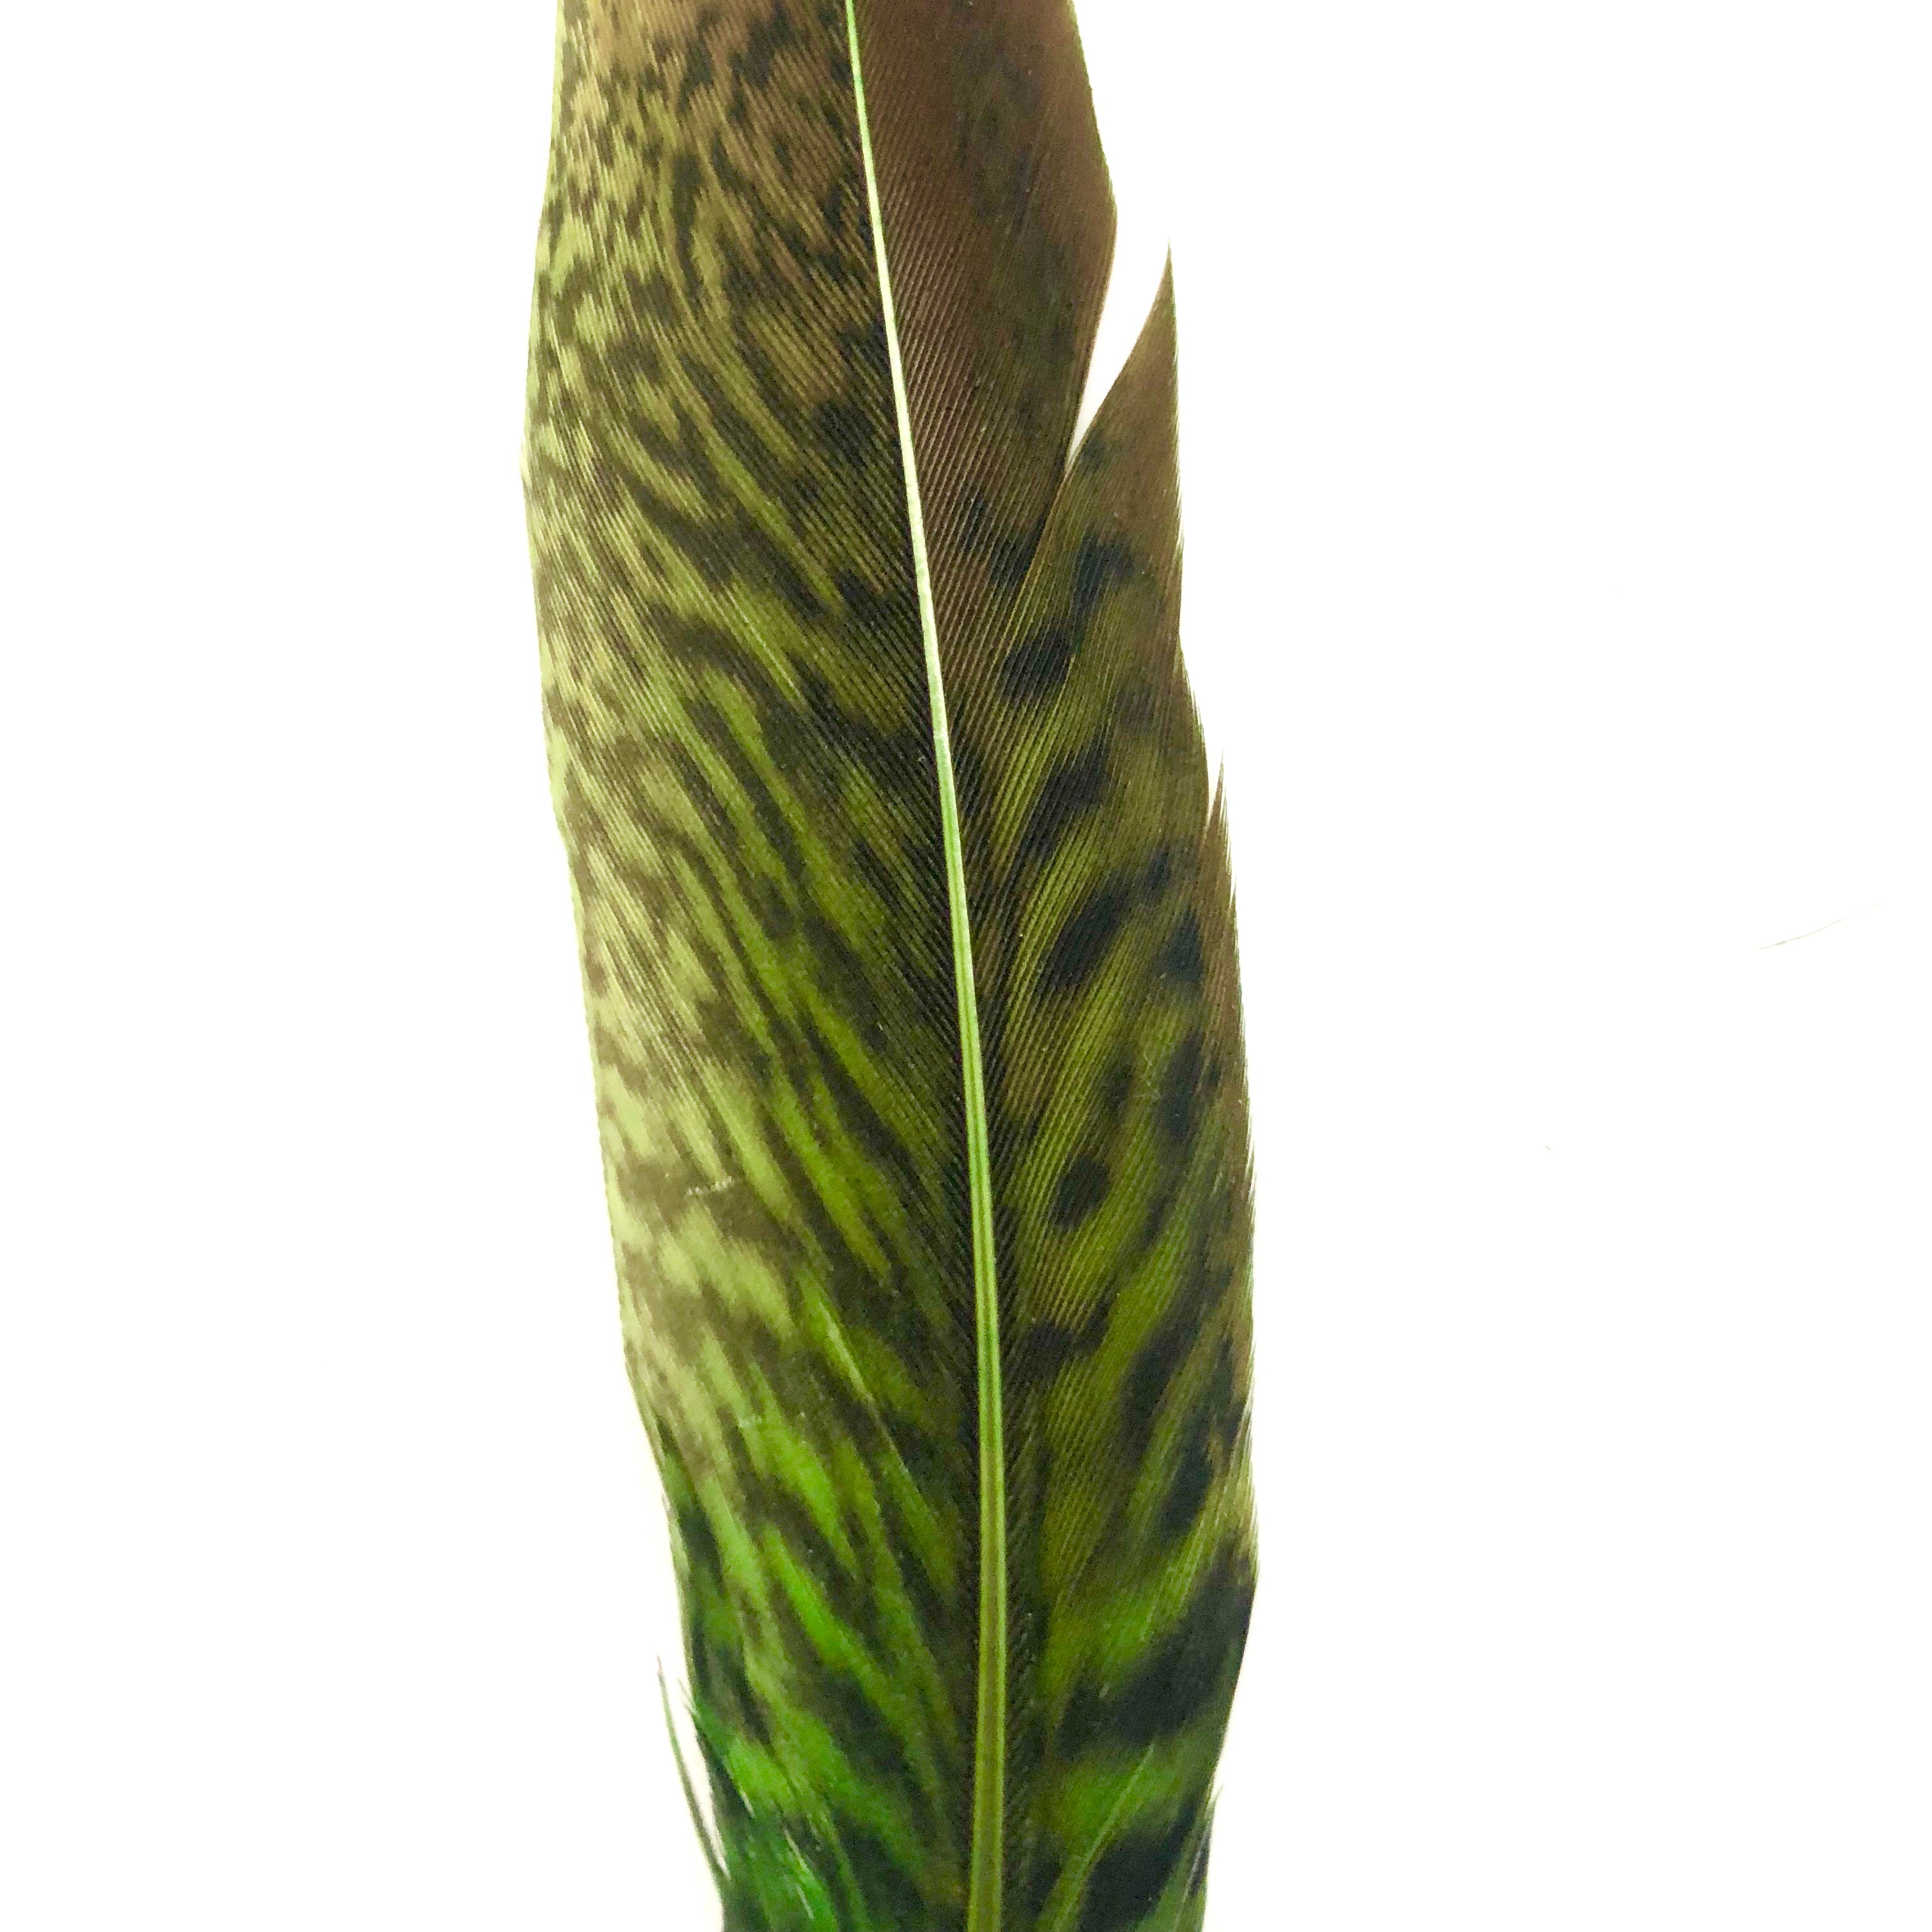 Under 6" Golden Pheasant Side Tail Feather x 10 pcs - Lime Green